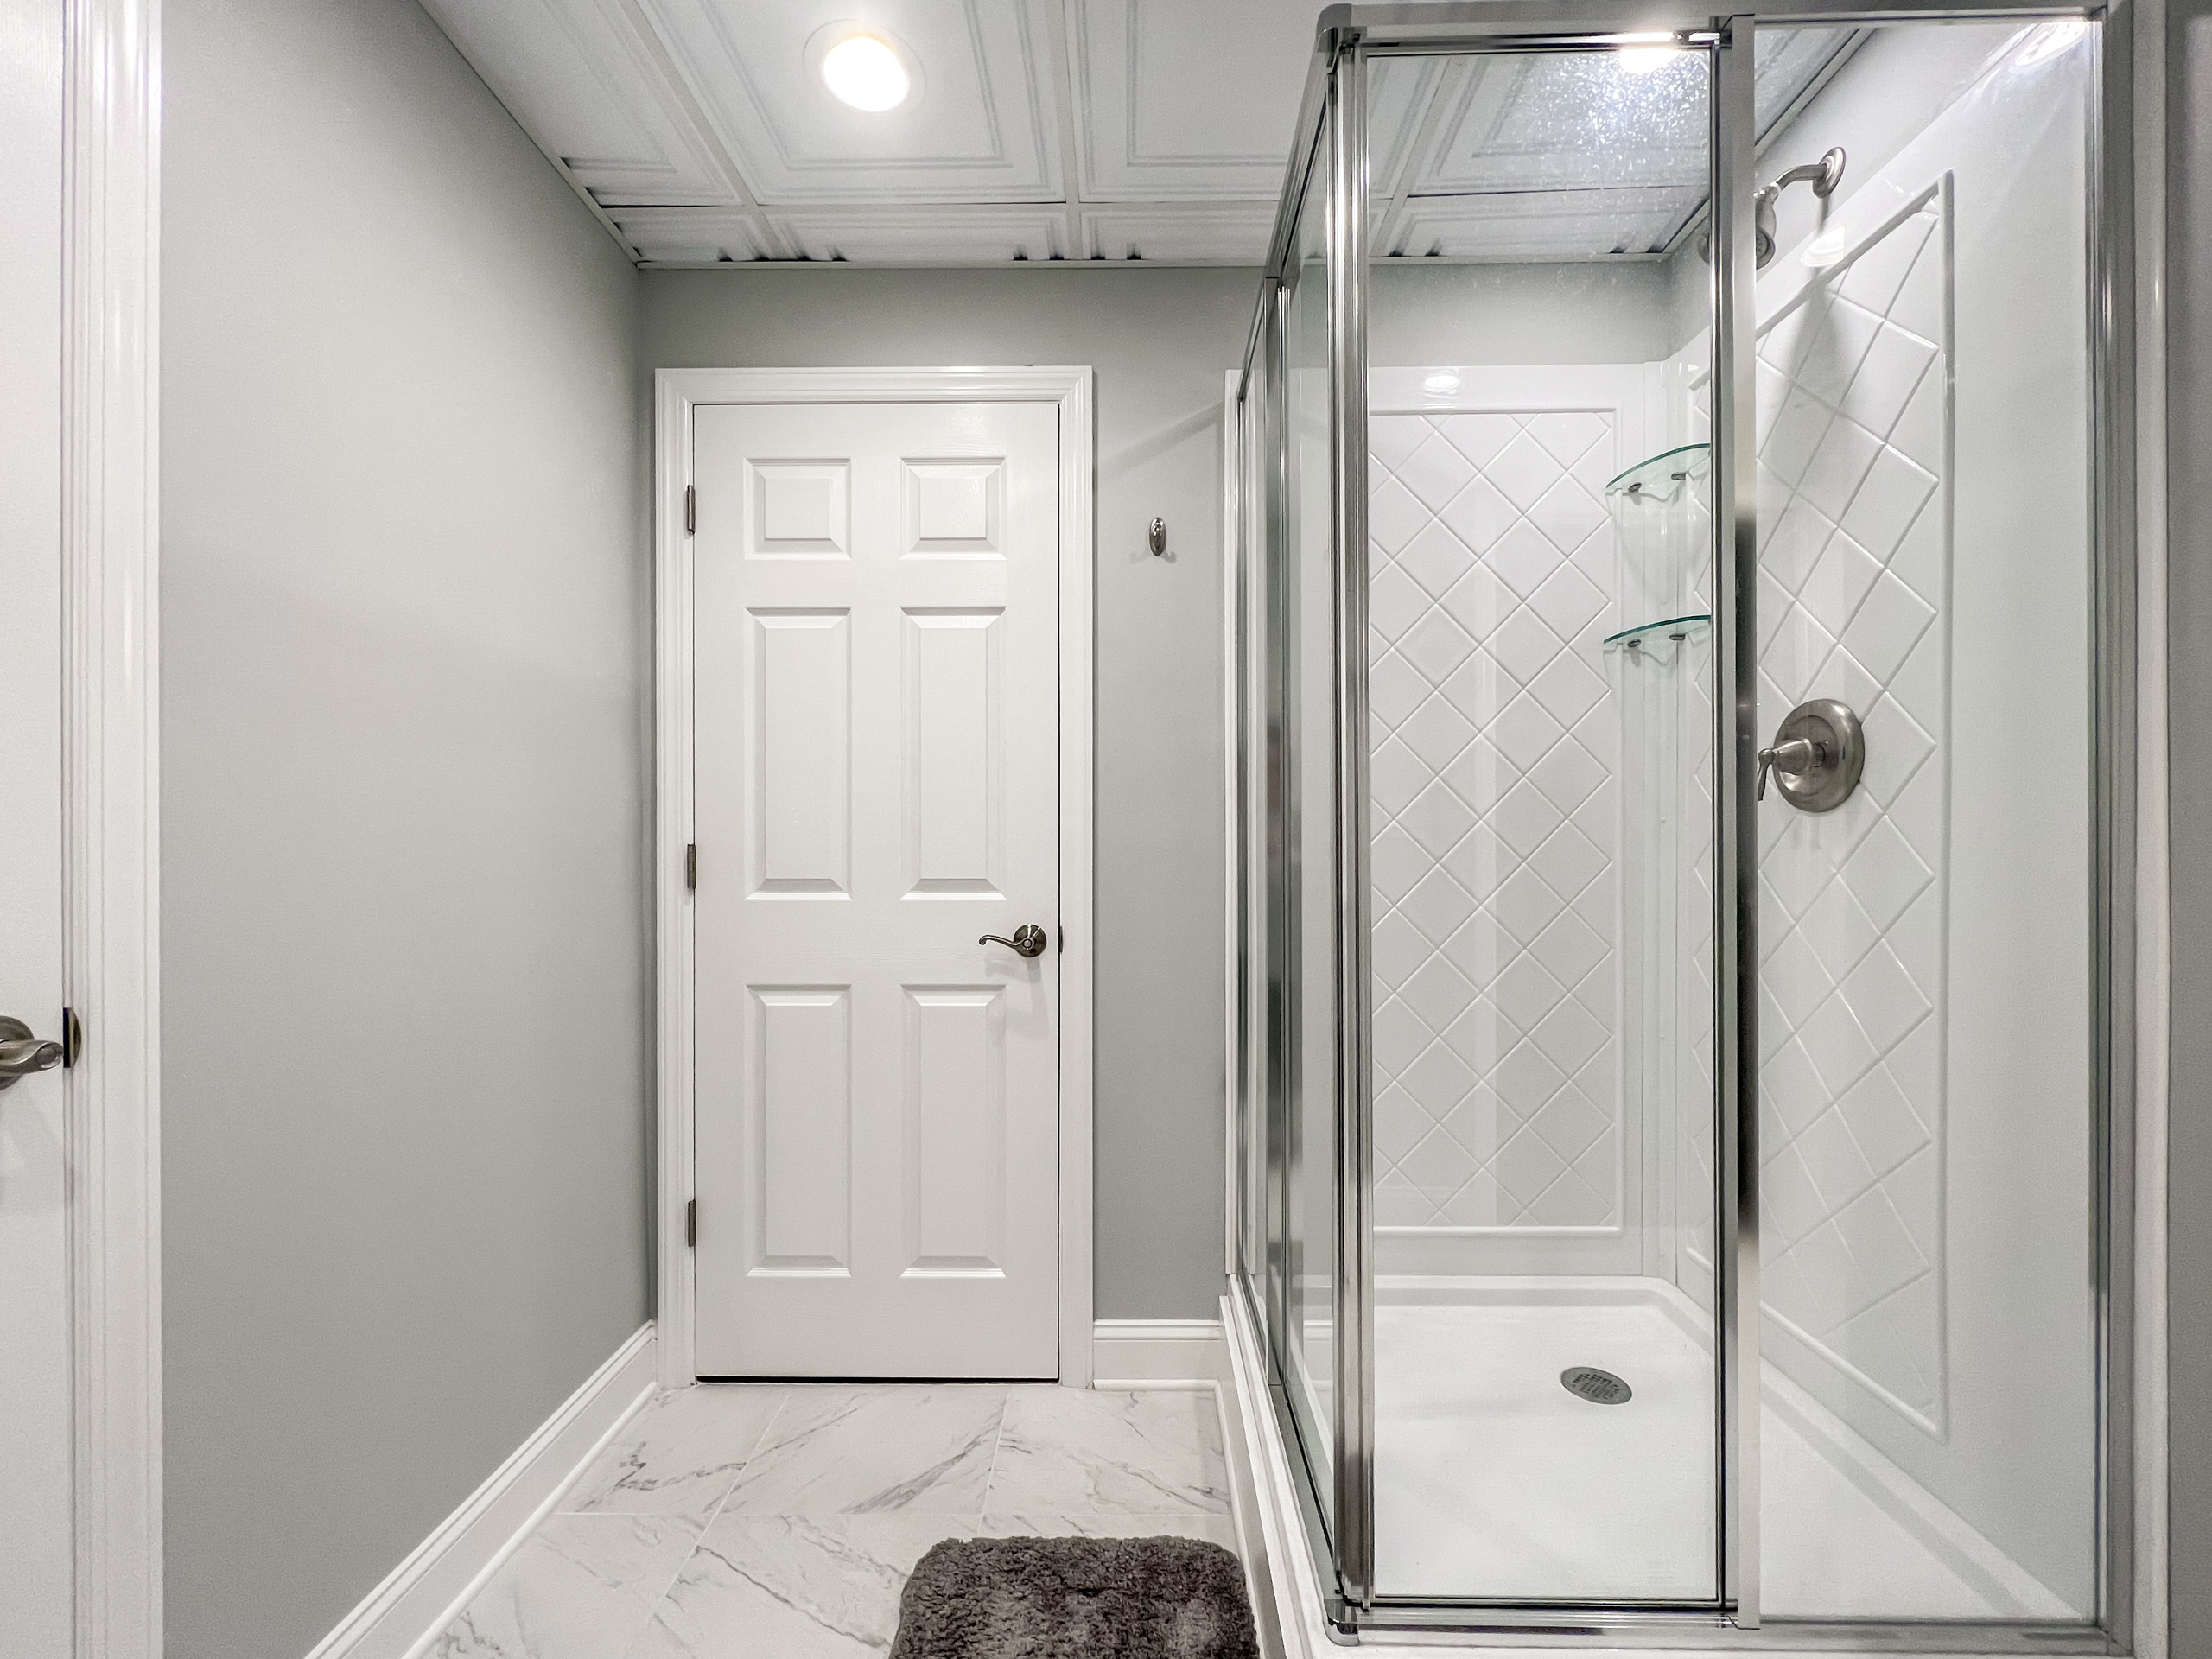 Featured Projects - Bathroom Build in Basement